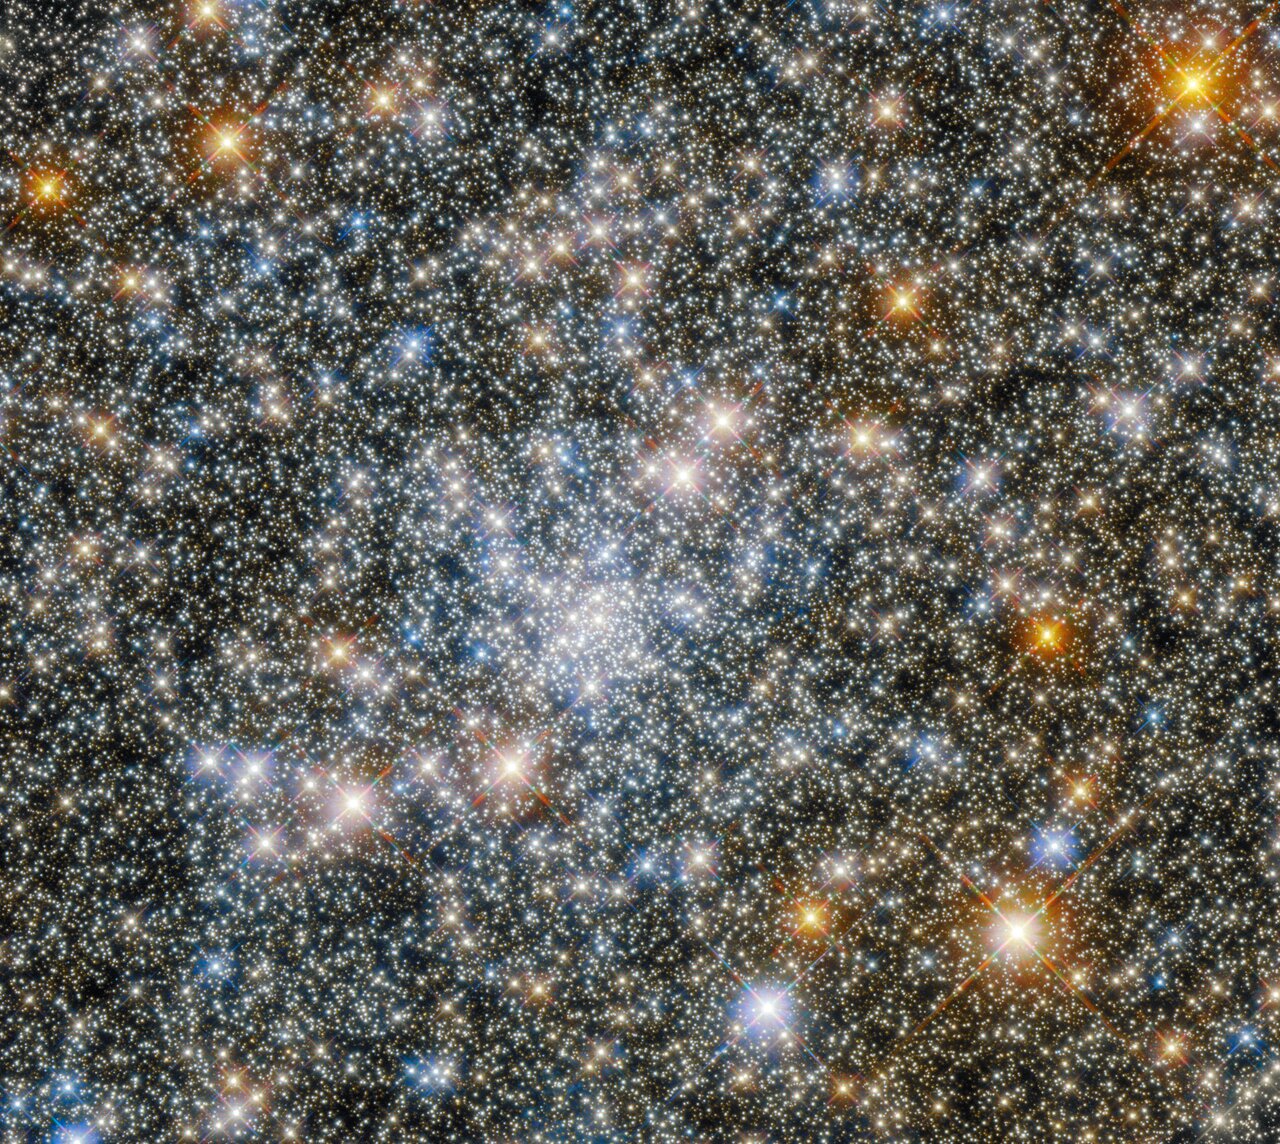 Thousands of stars press close together in Hubble image